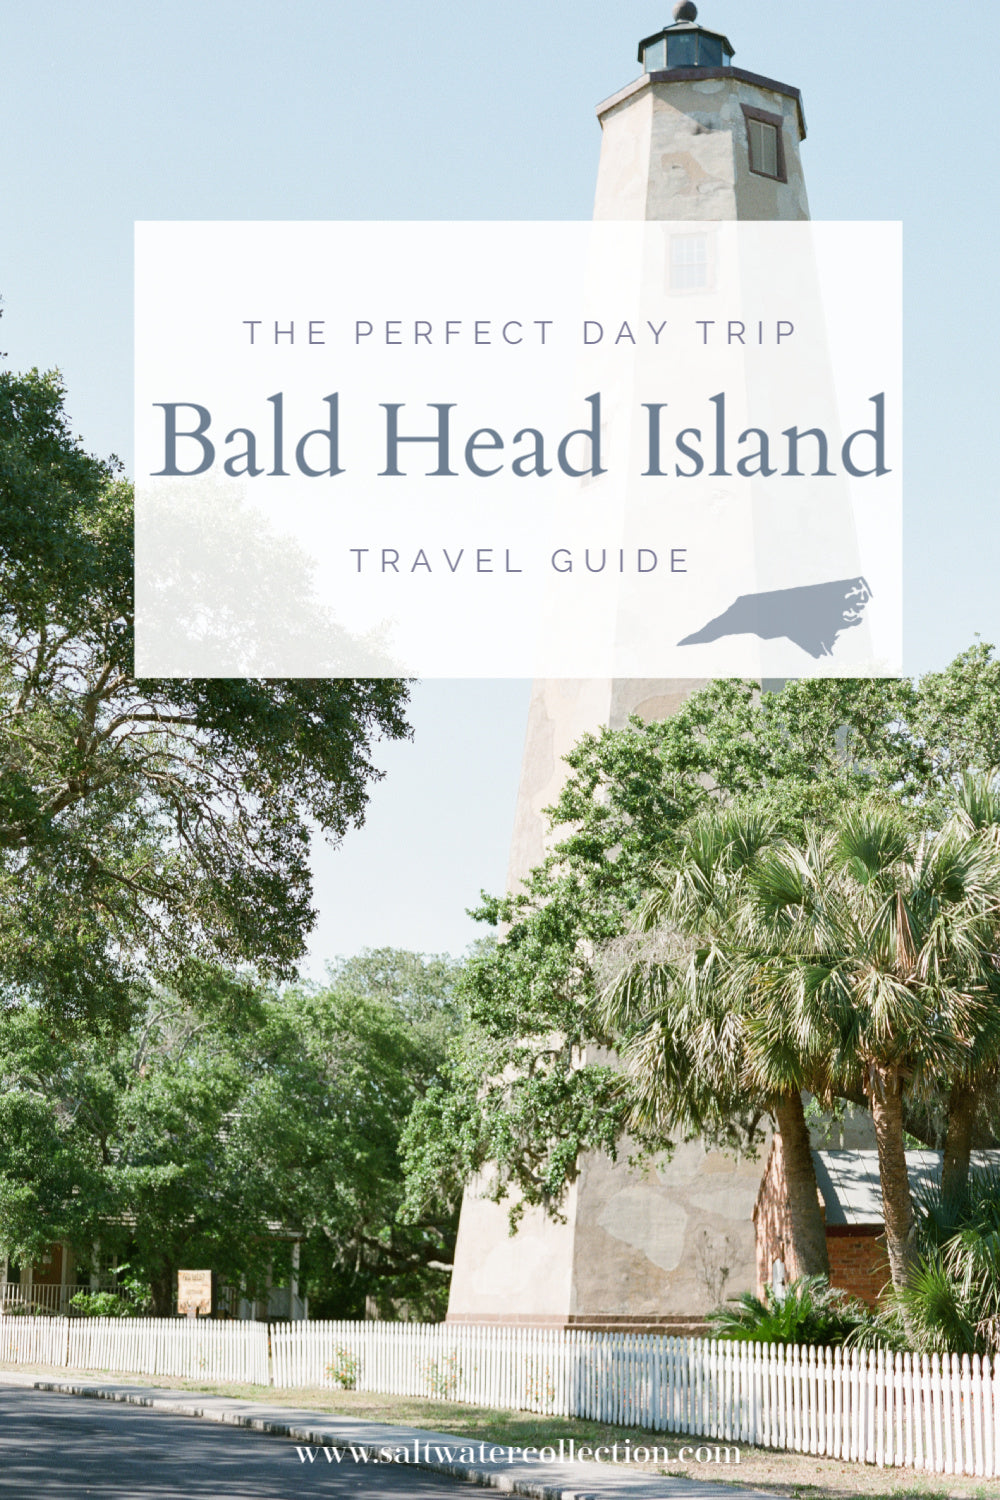 The Perfect Day Trip to Bald Head Island